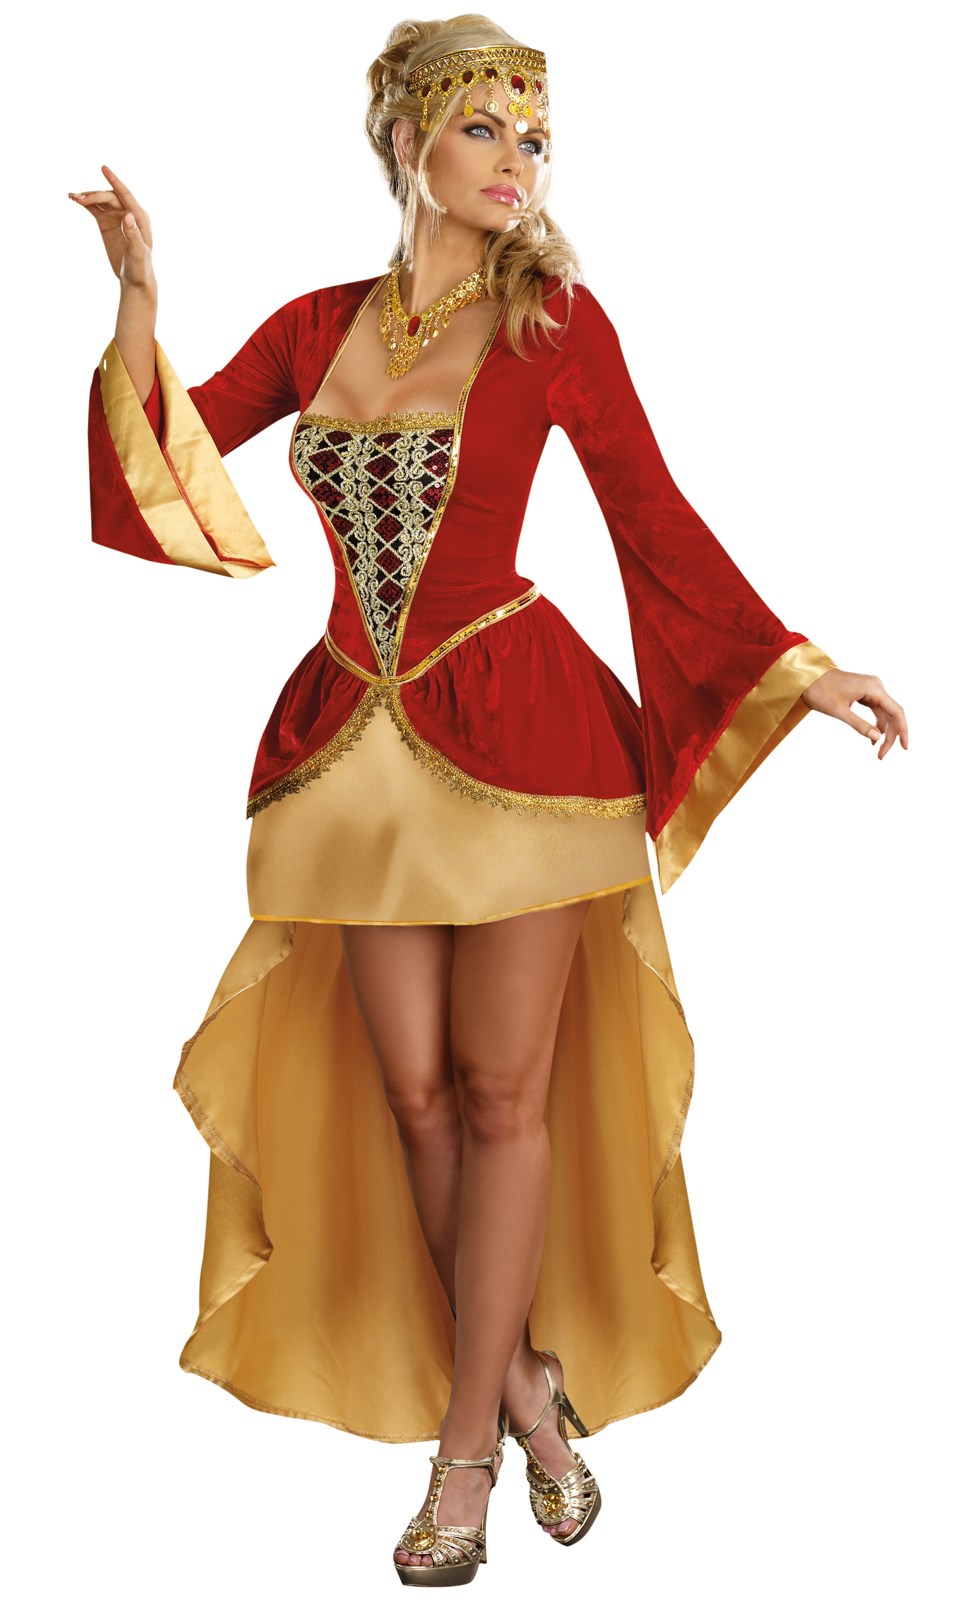 Royally Yours Adult Costume